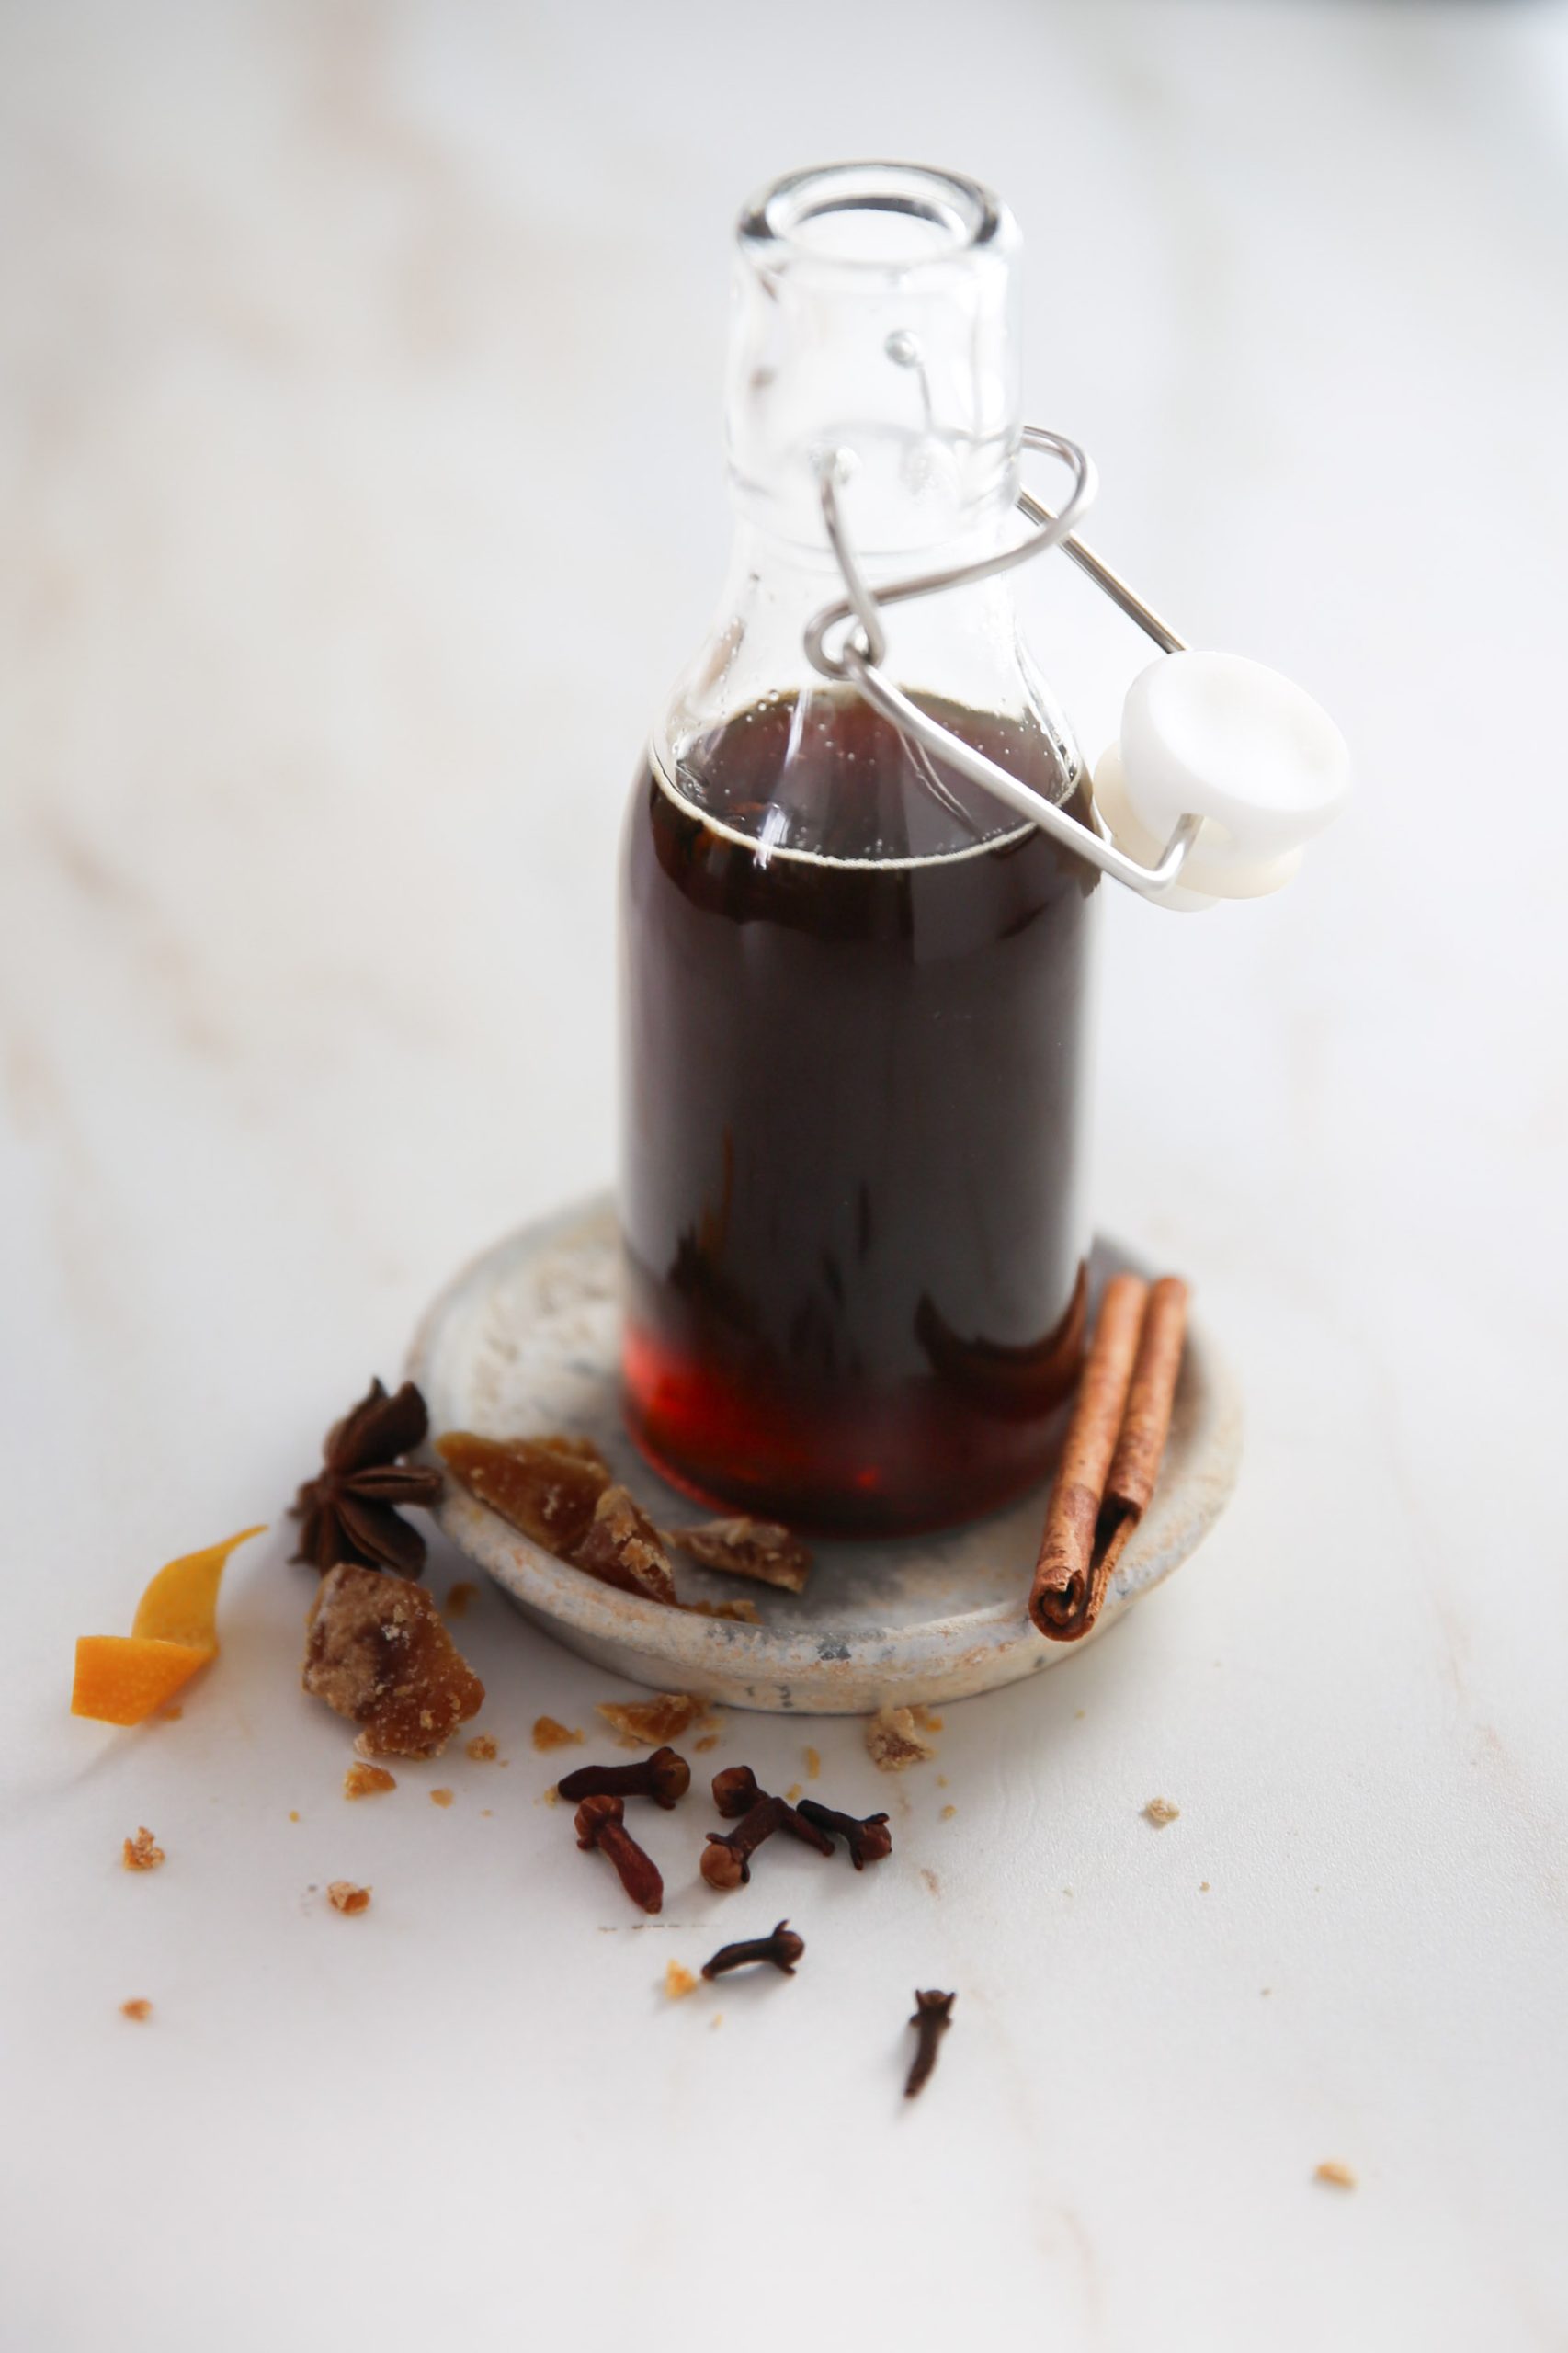 A glass bottle with cinnamon sticks and spices on a white plate, accompanied by Cafe de olla syrup.